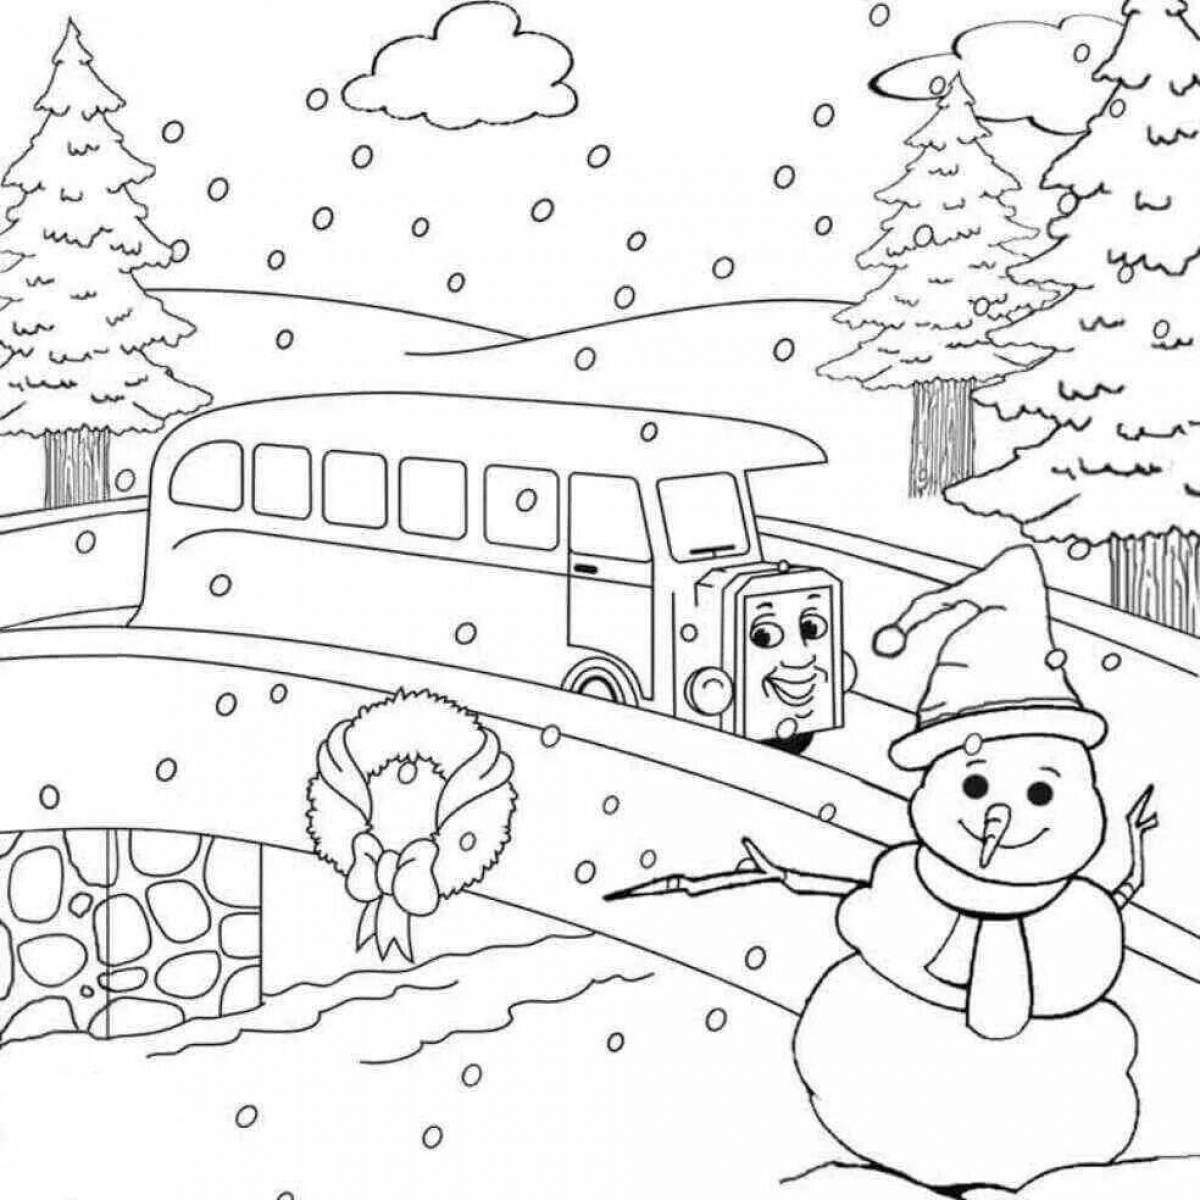 Cute winter scenery coloring book for 3-4 year olds